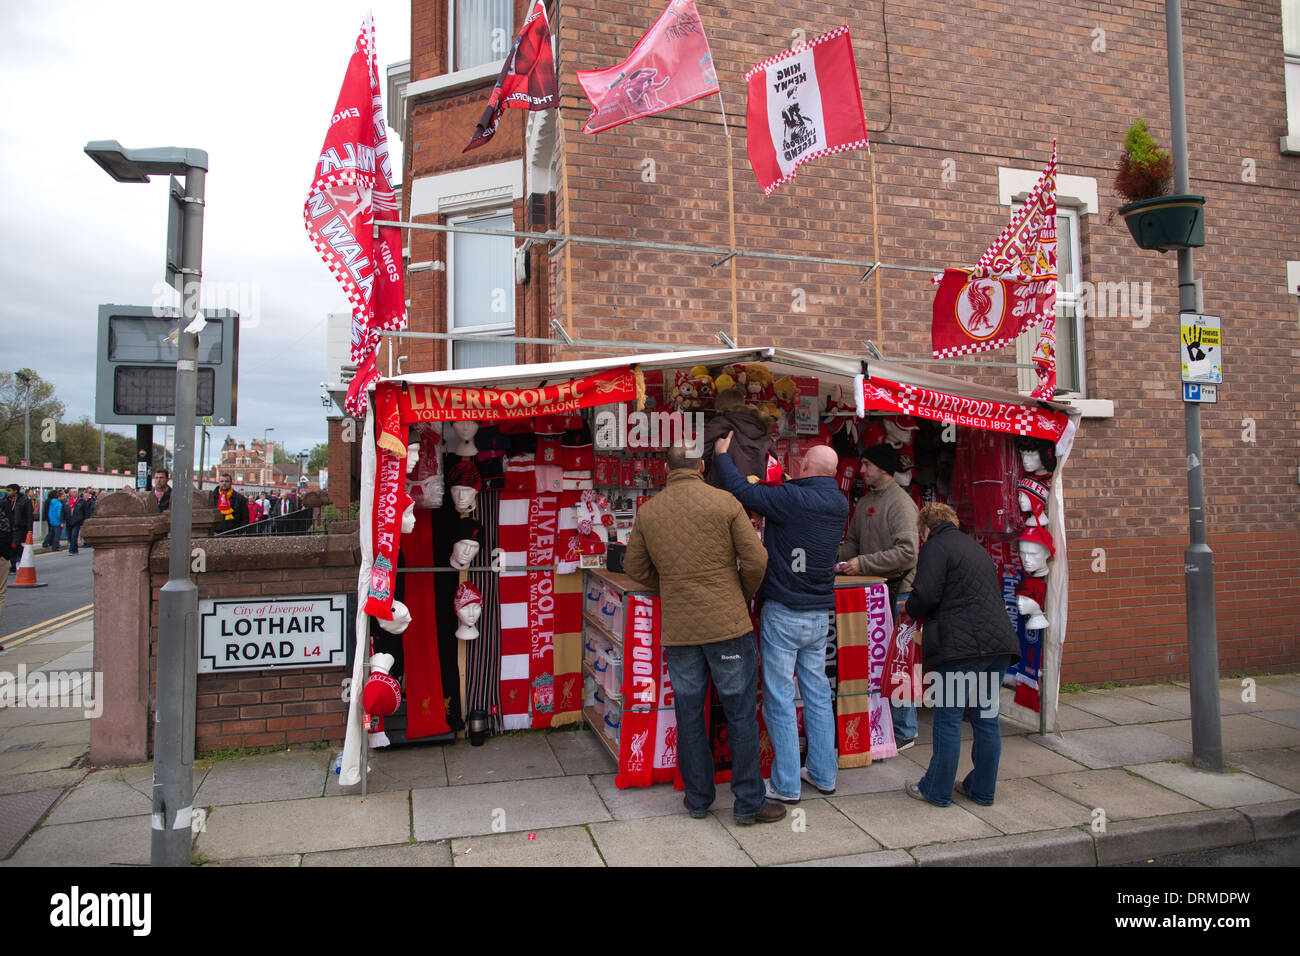 Liverpool Football supporters merchandise sold on the corner of Lothair Road, Anfield, Liverpool, England, UK Stock Photo